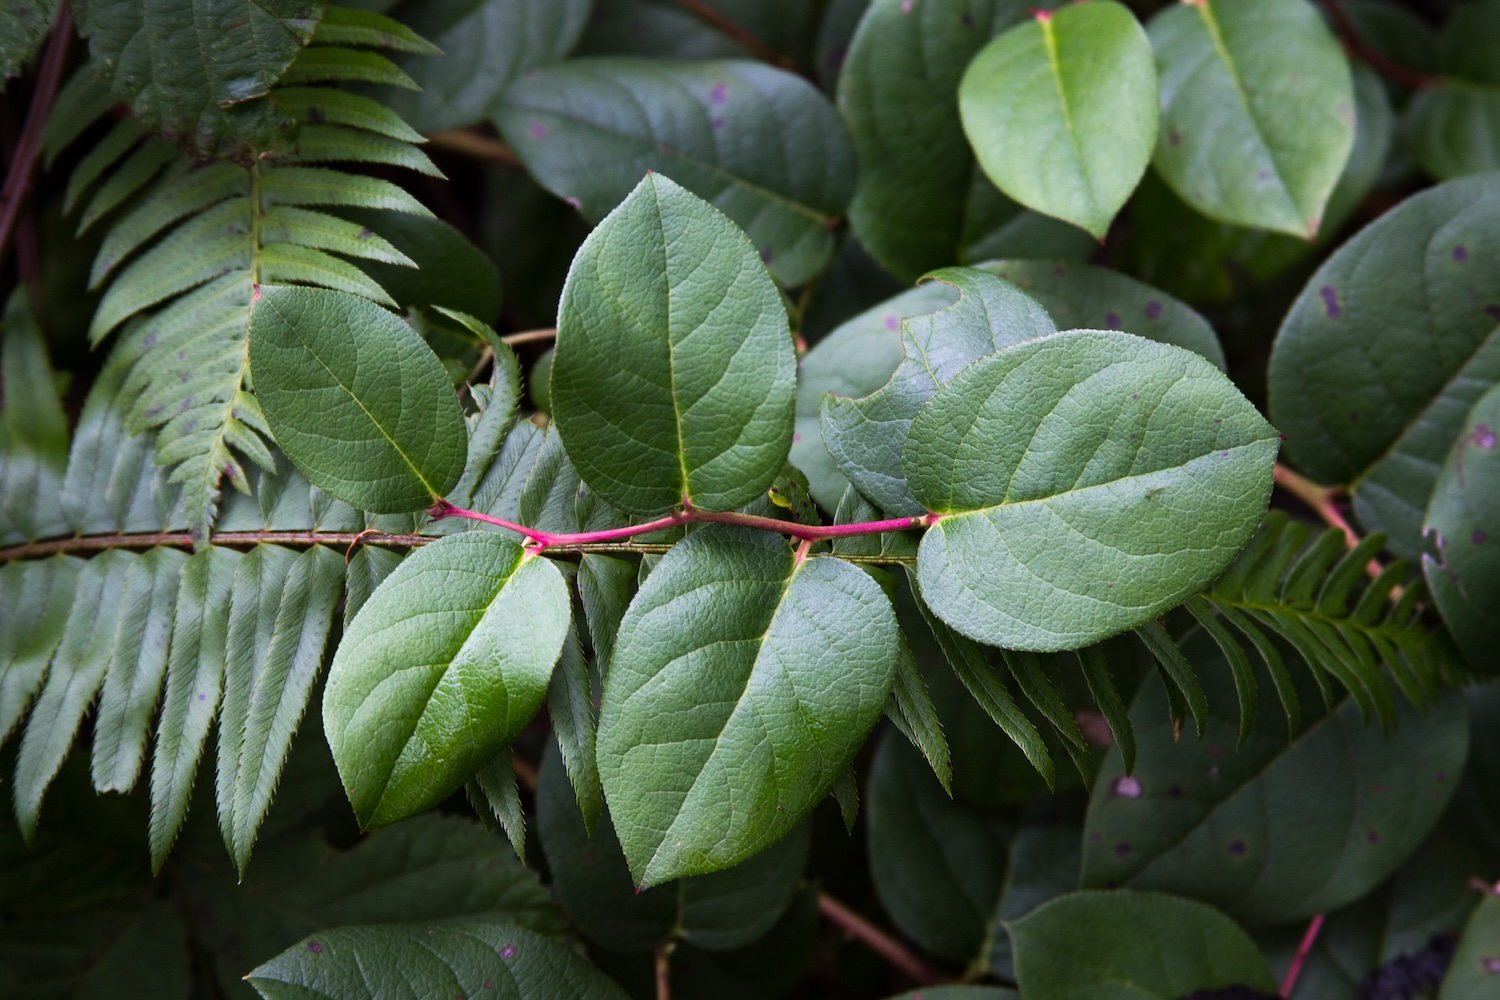 A close-up of a lemon leaf, or salal, plant on its characteristic reddish-pink stem, surrounded by a muted backdrop of other ferns and foliage.